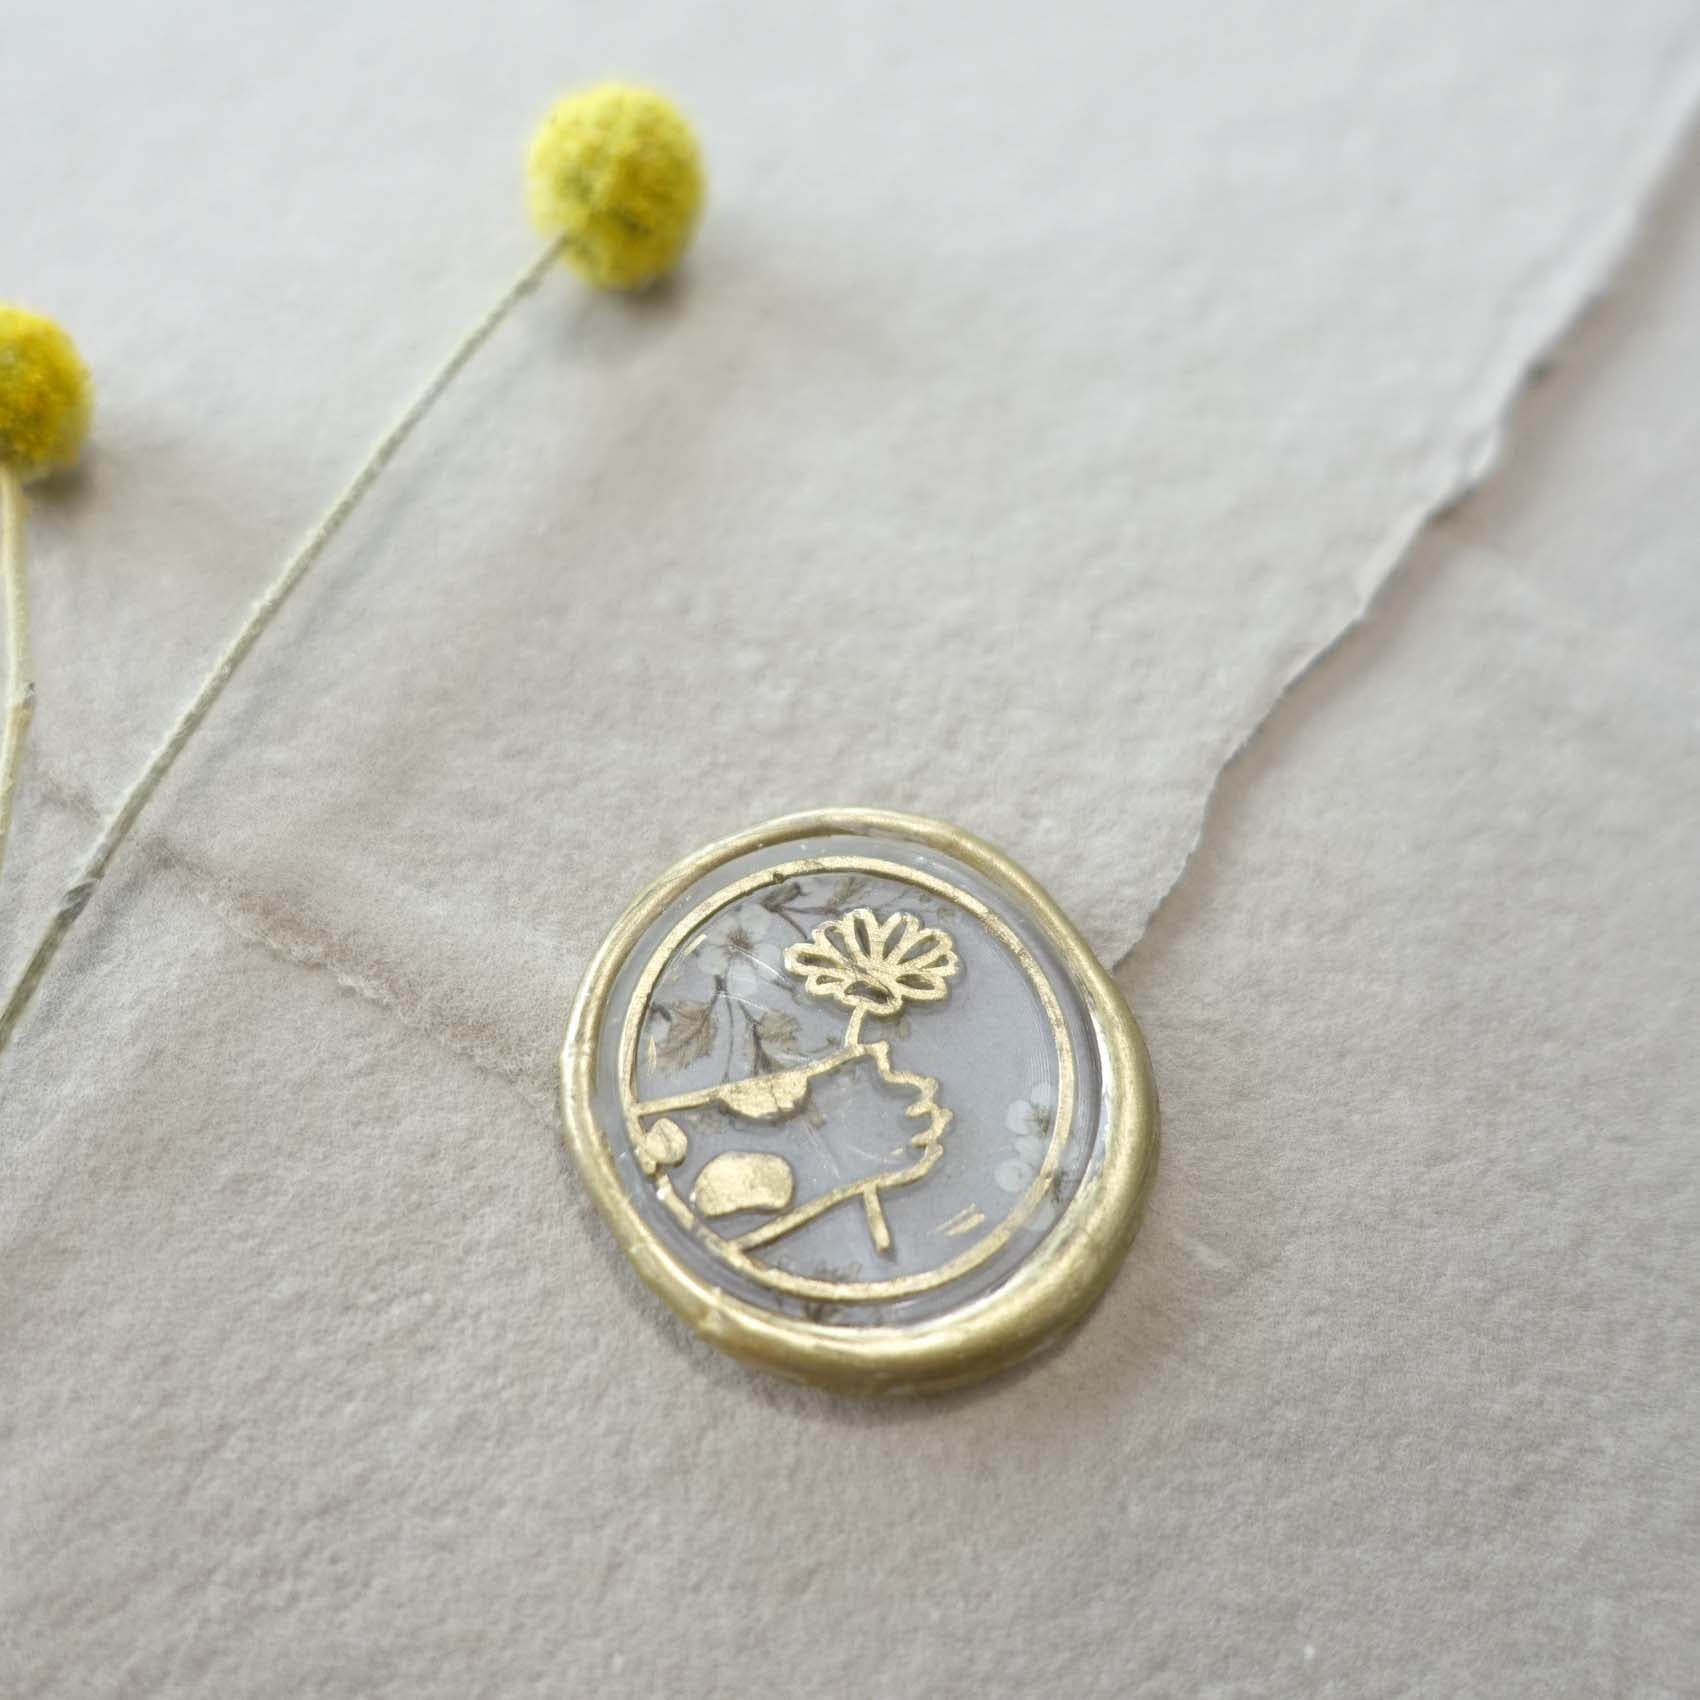 [PRE-ORDER] Paw Holding Flower wax seal stamp, wax seal kit or stamp head